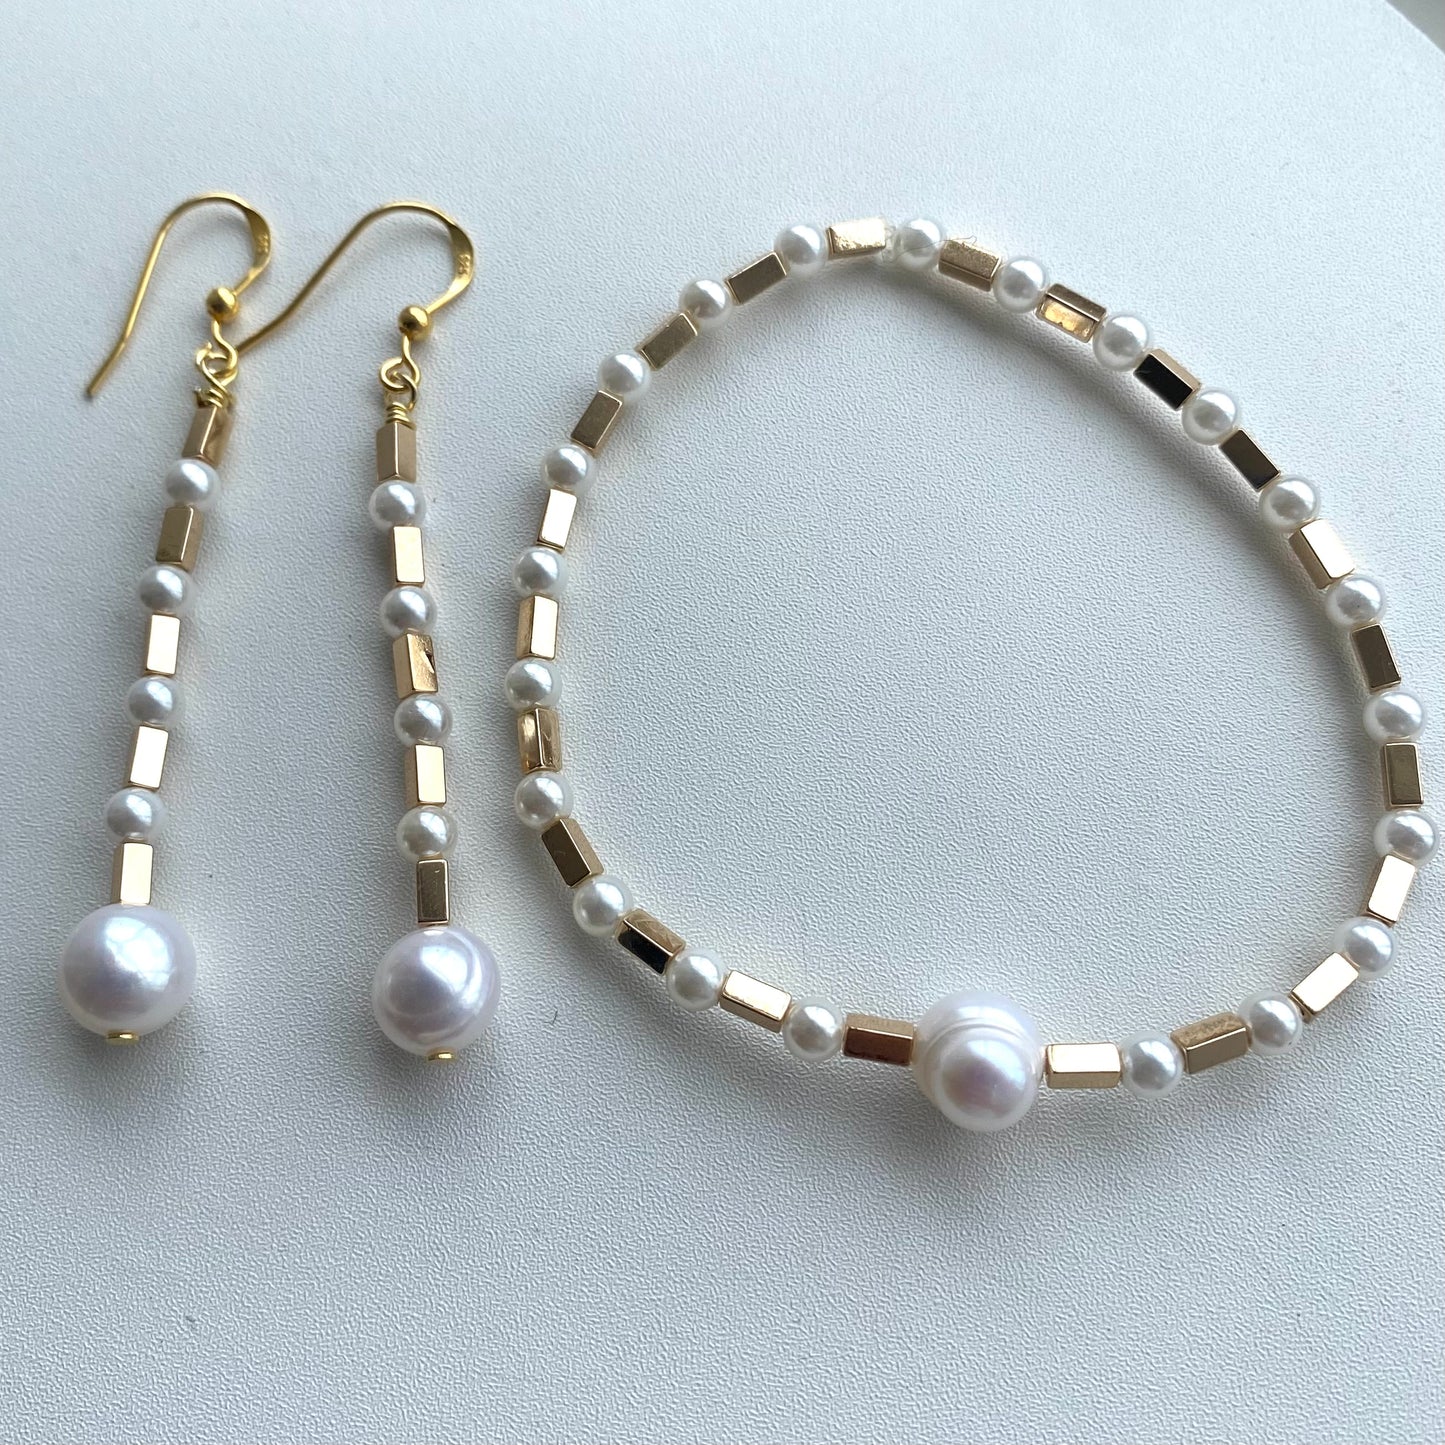 Pearl and gold hematite earrings